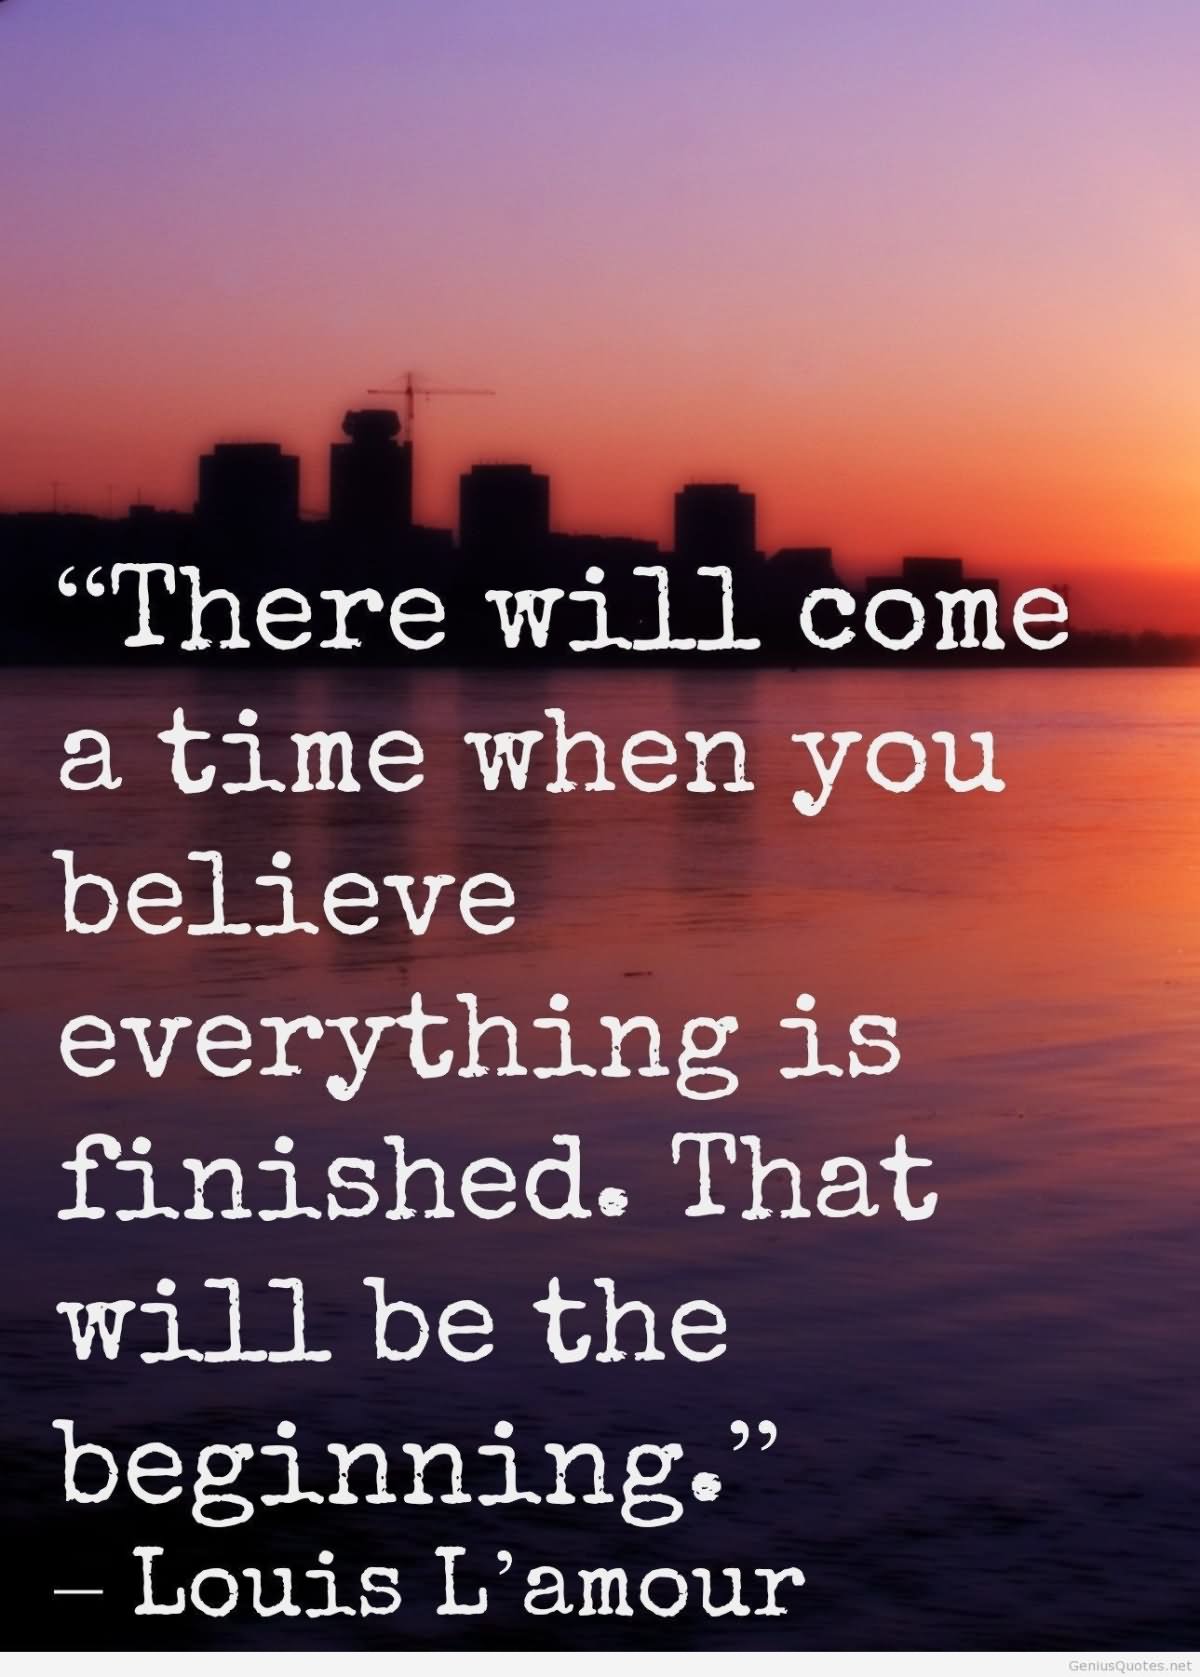 There will come a time when you believe everything is finished; that will be the beginning.